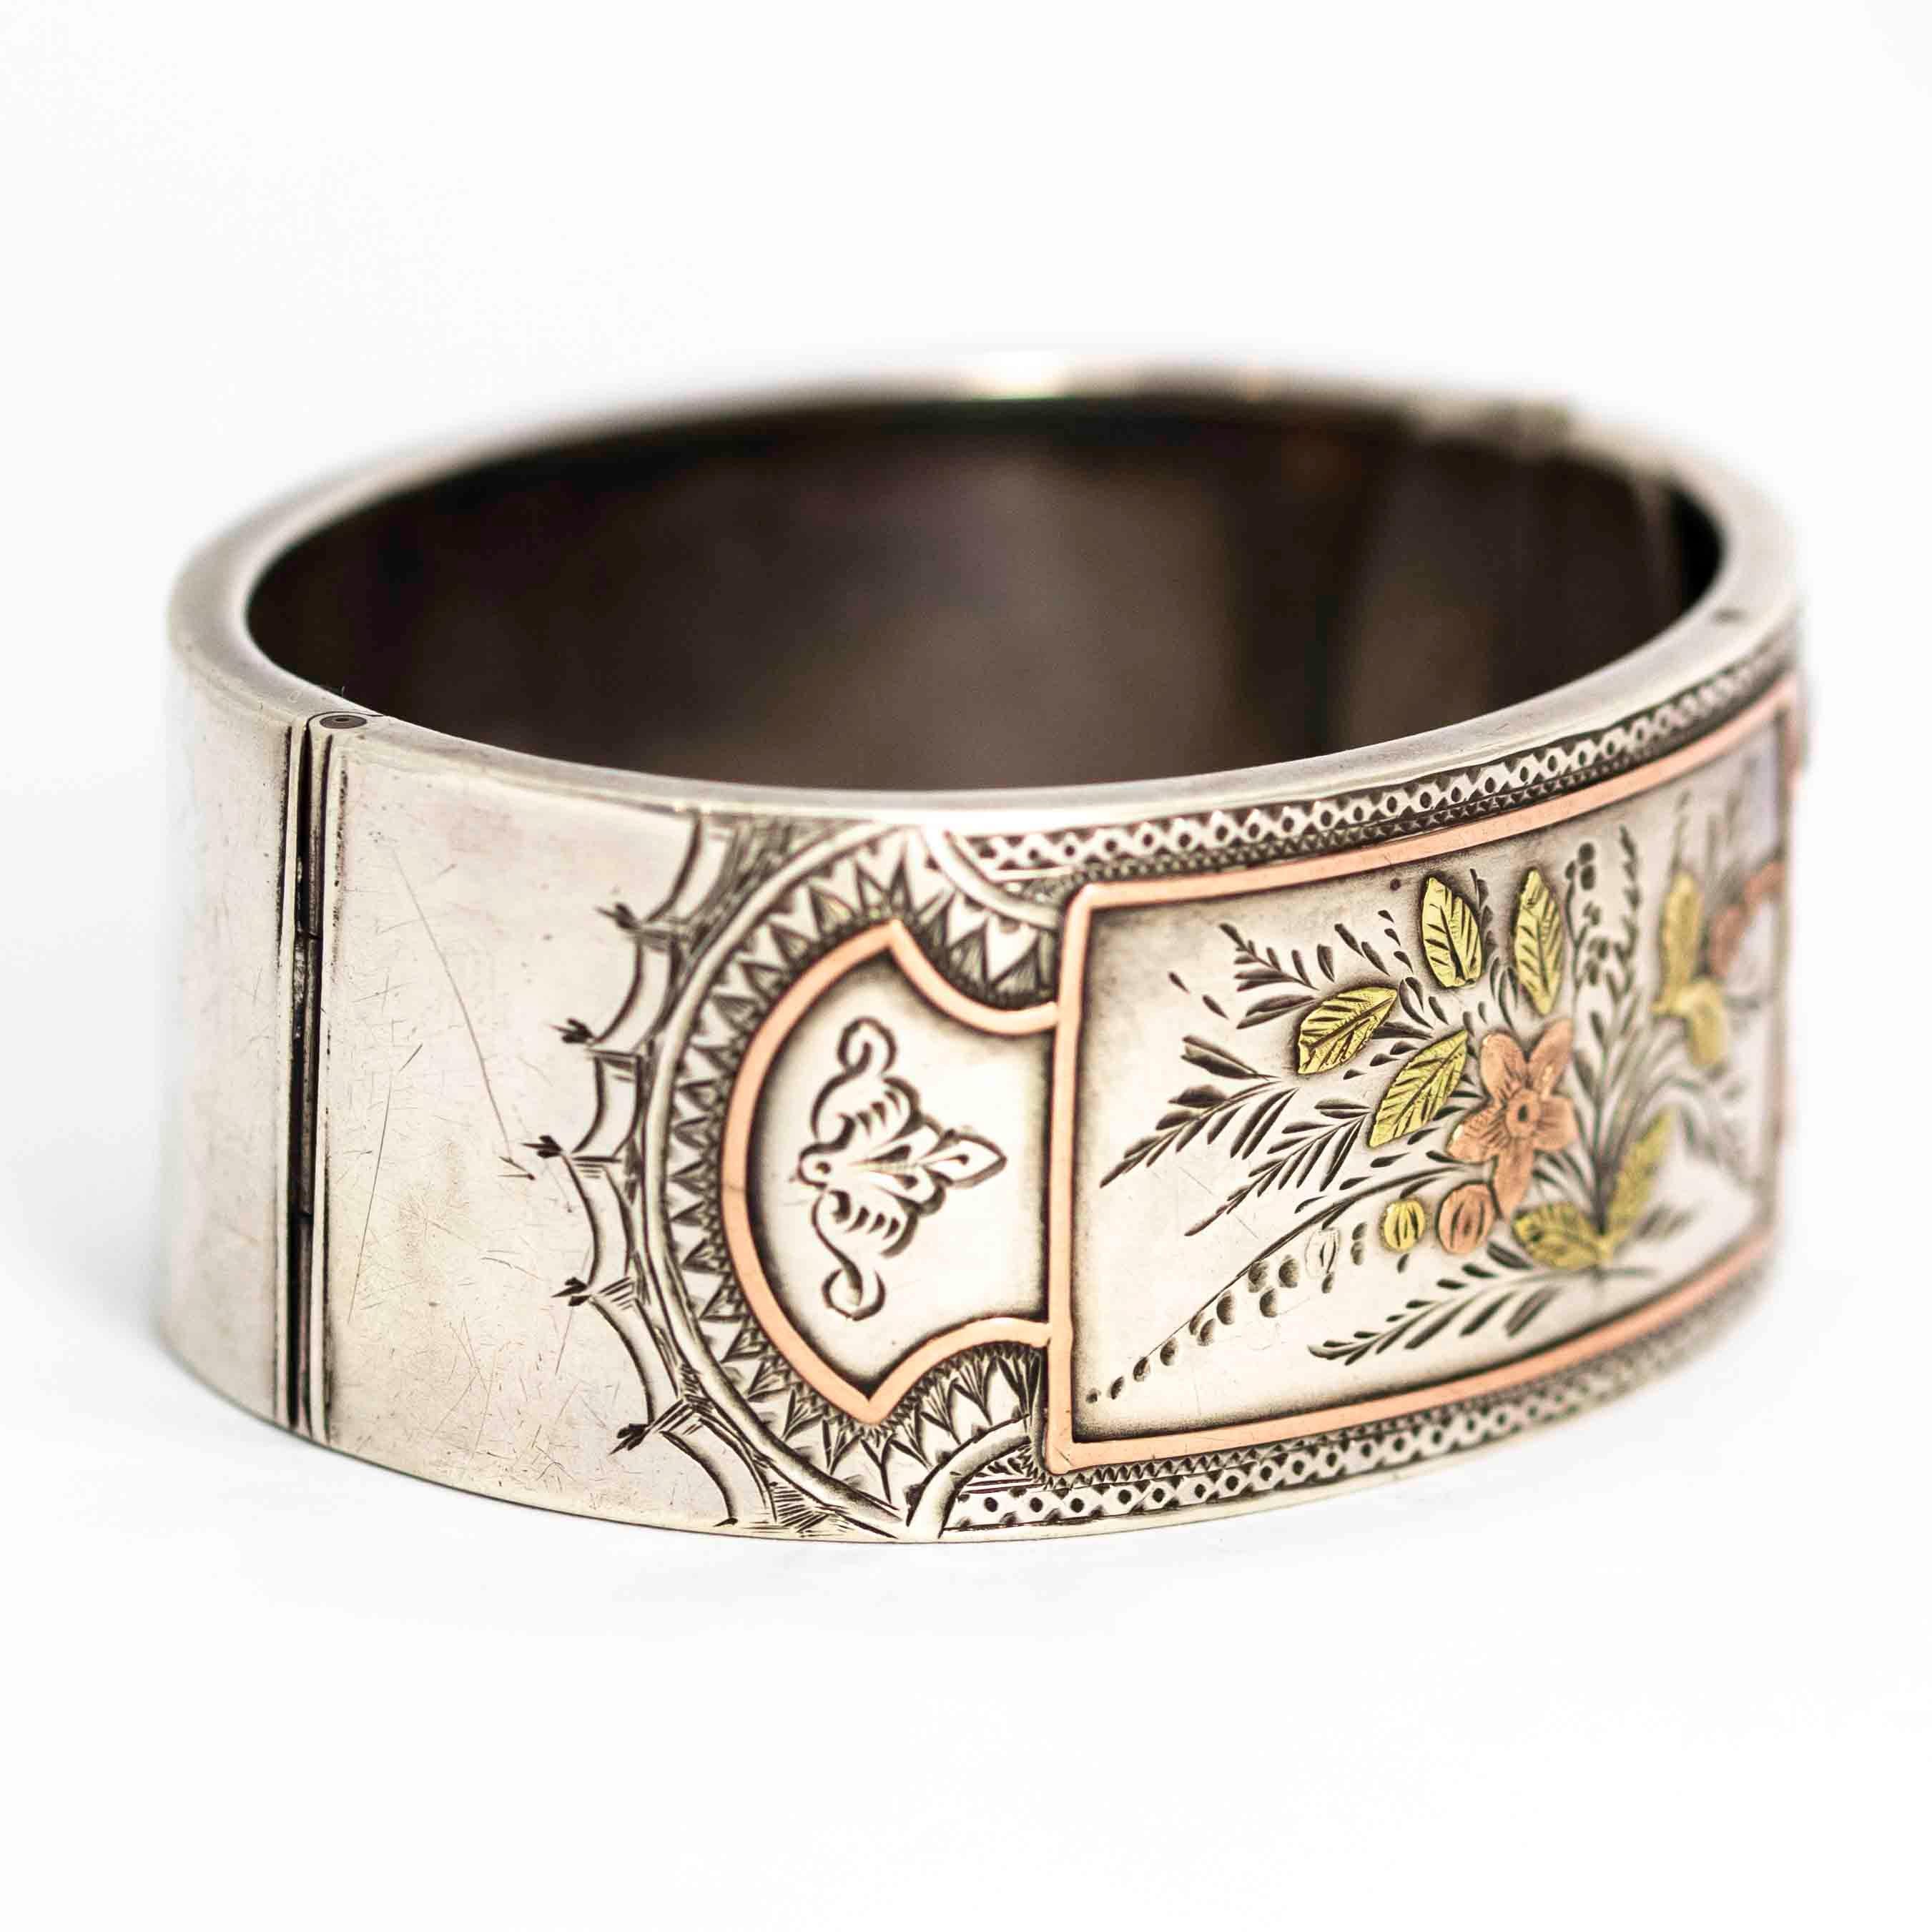 Aesthetic Victorian Two-Tone Gold Overlay Ornate Silver Bangle In Fair Condition For Sale In Chipping Campden, GB